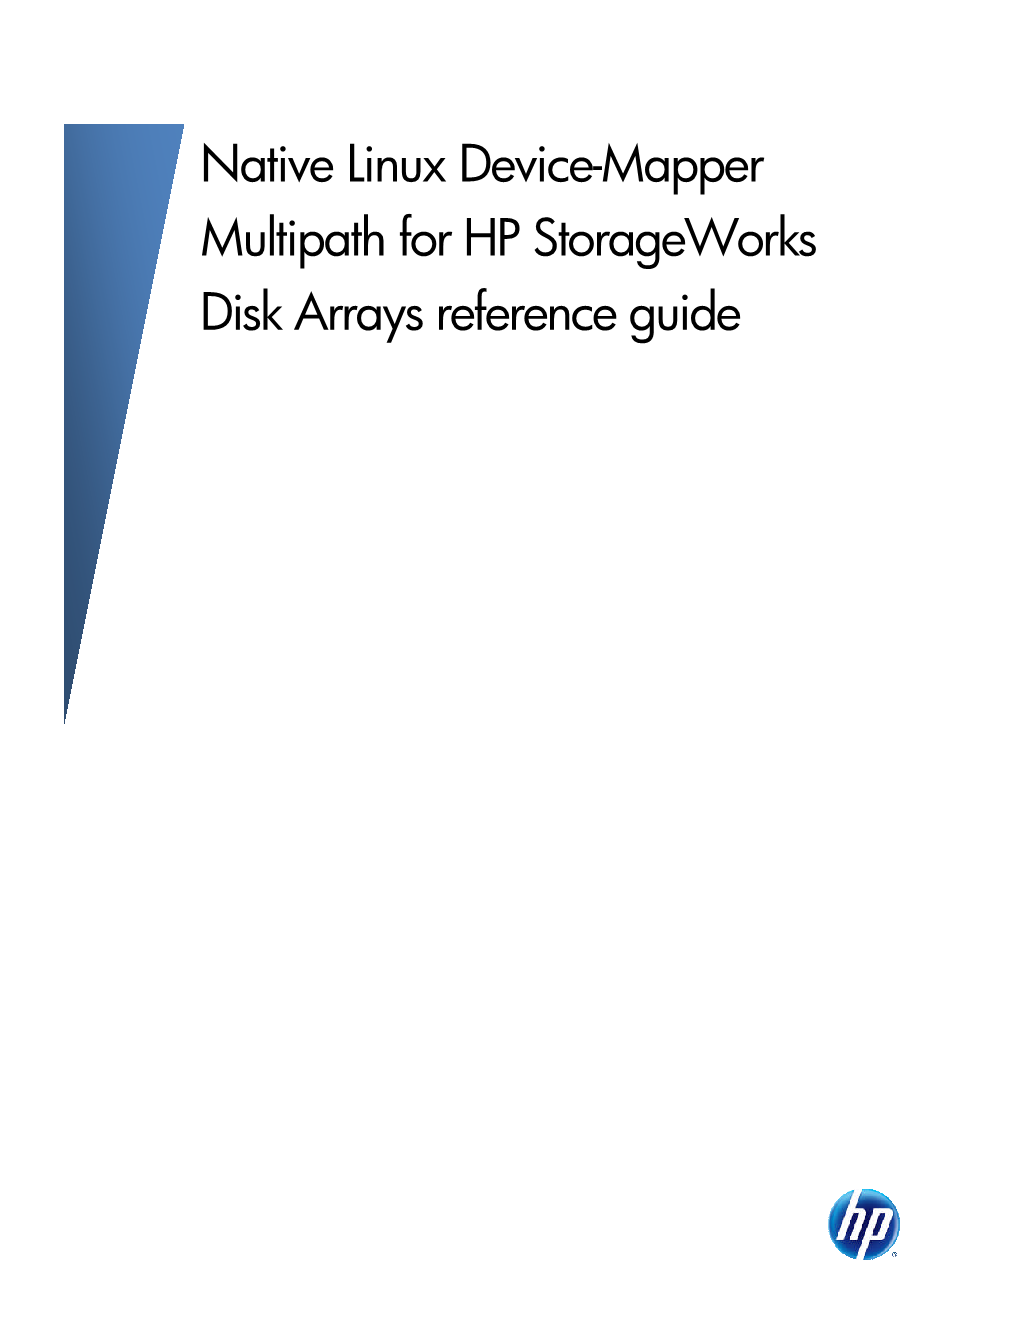 Native Linux Multipath Disk Arrays Linux Device-Mapper Multipath For